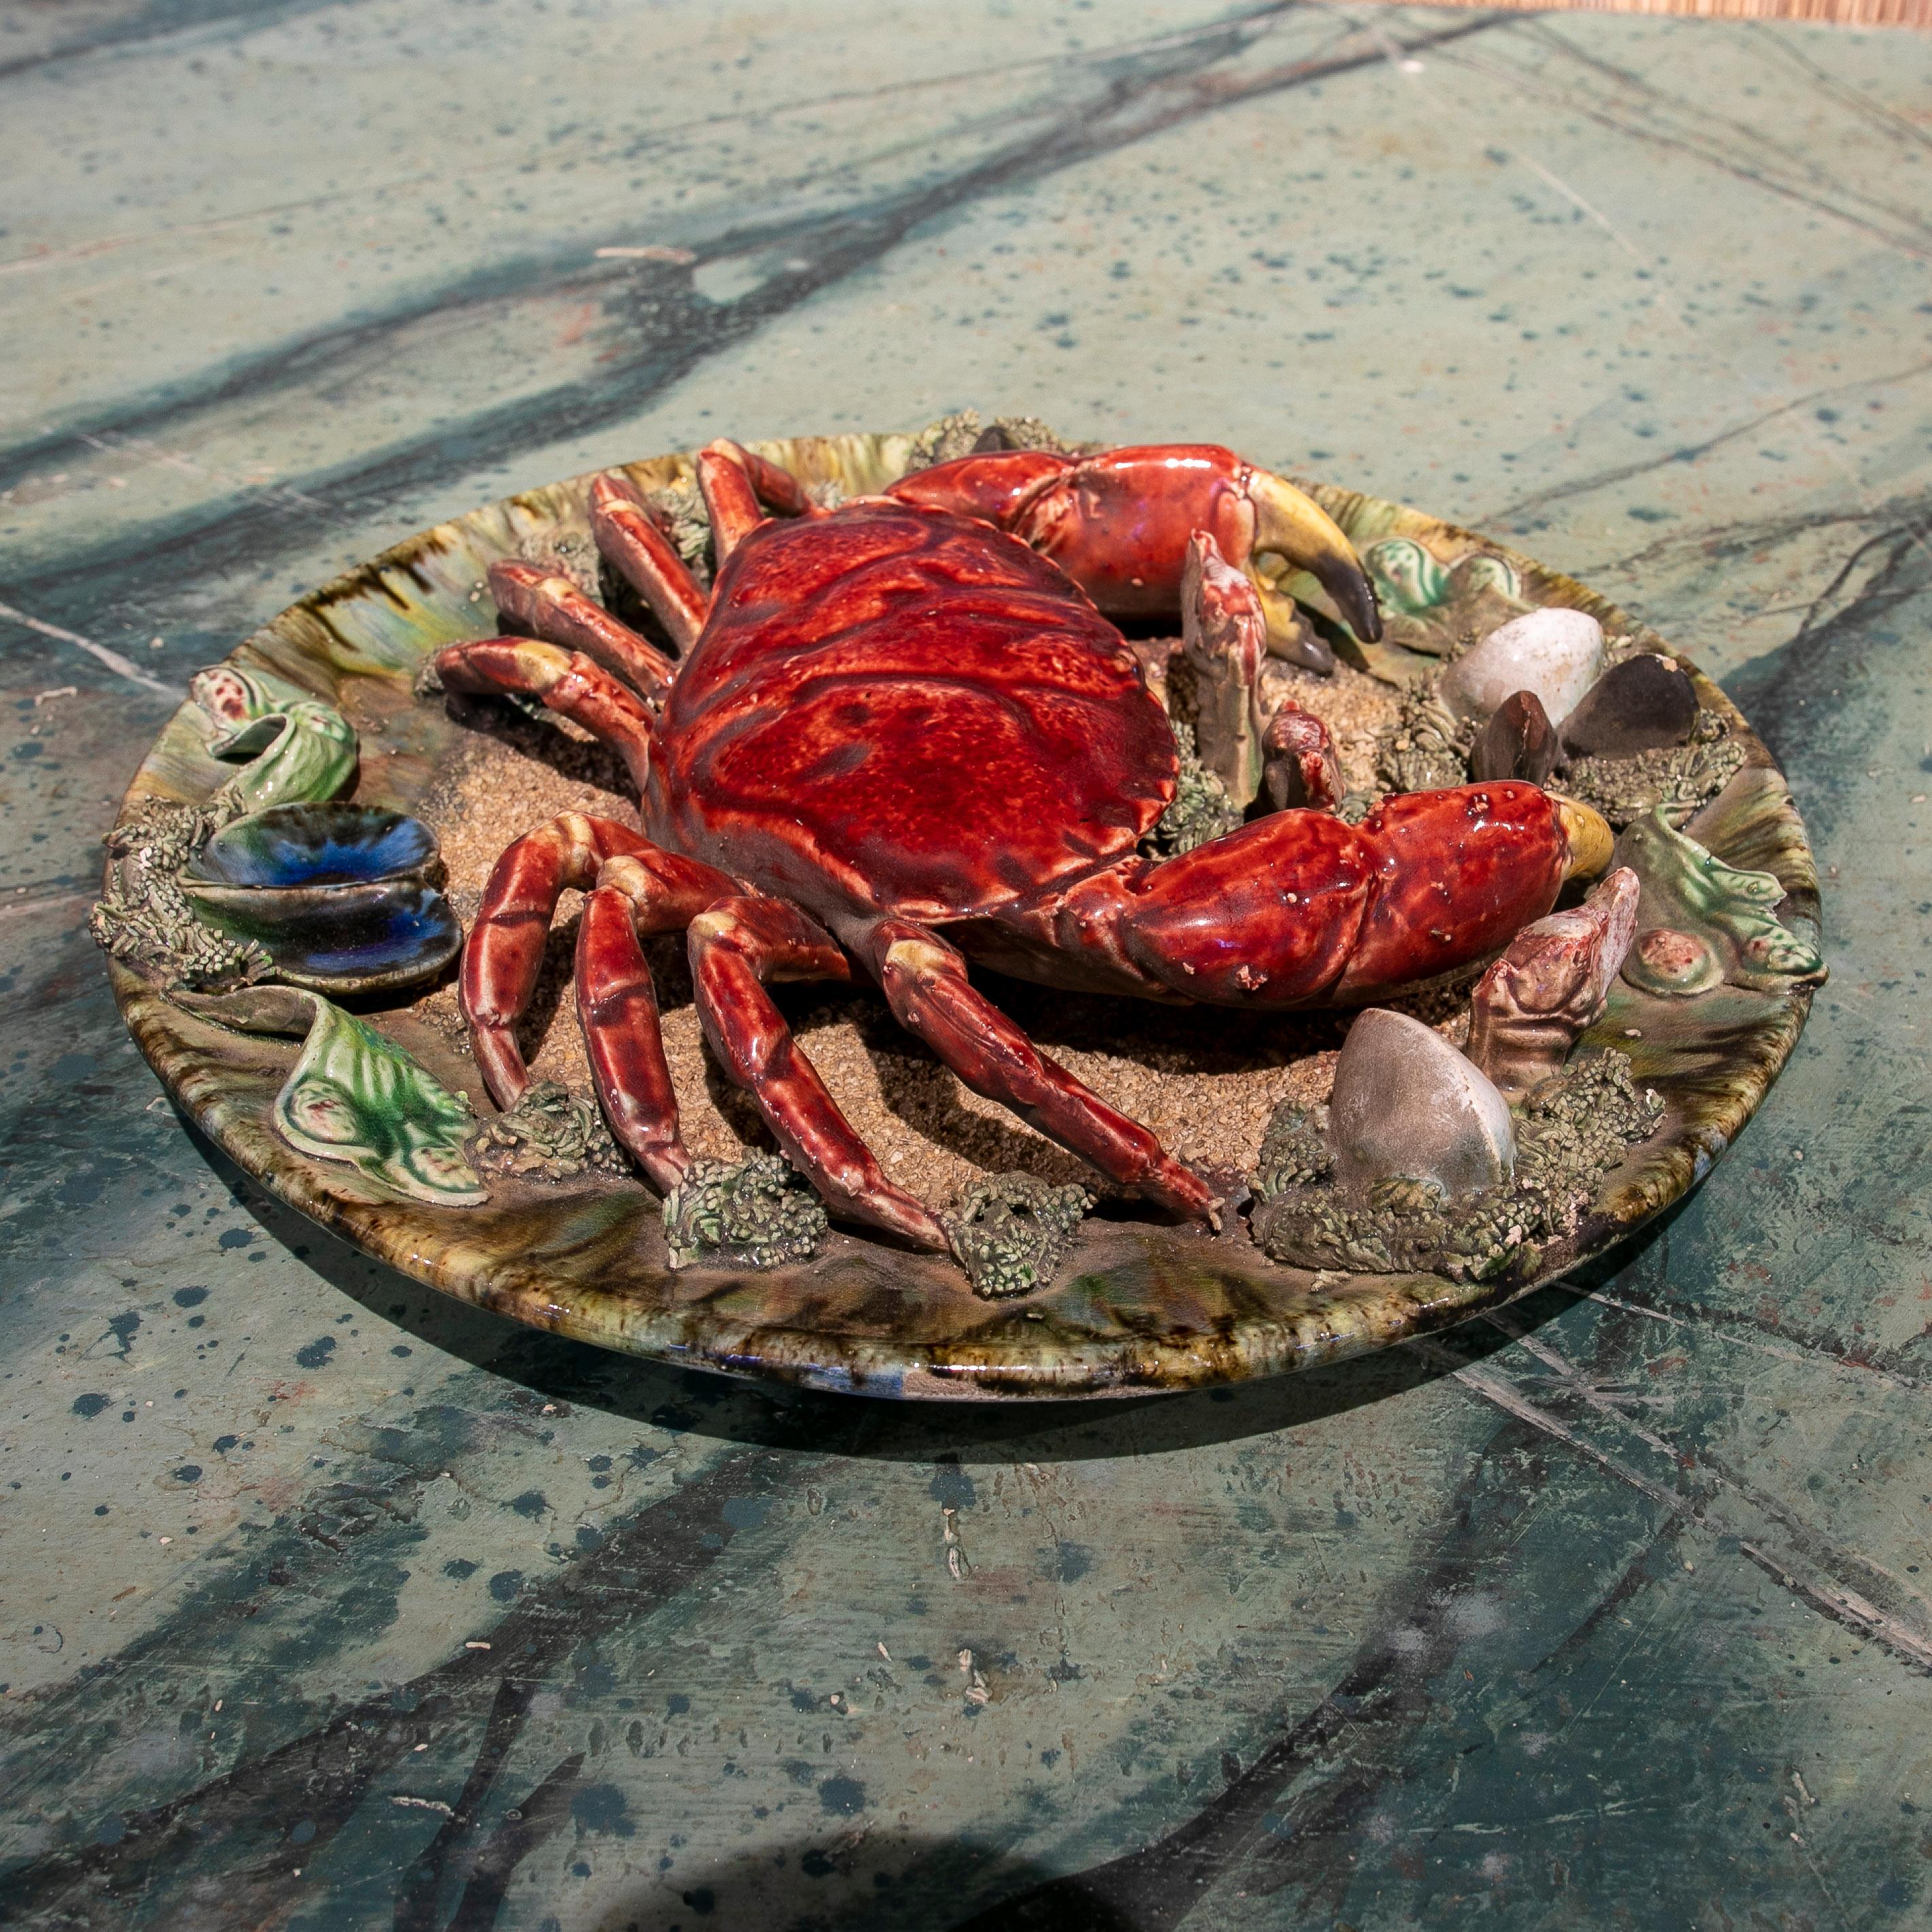 Portuguese Majolica Palissy ware wall plate 32 cm, signed Caldas da Rainha, circa 1940, featuring a large crab foremost and centre, on a green plate with sand, seaweed, mussels and sea shells. Colourfully glazed three dimensional ceramic plates